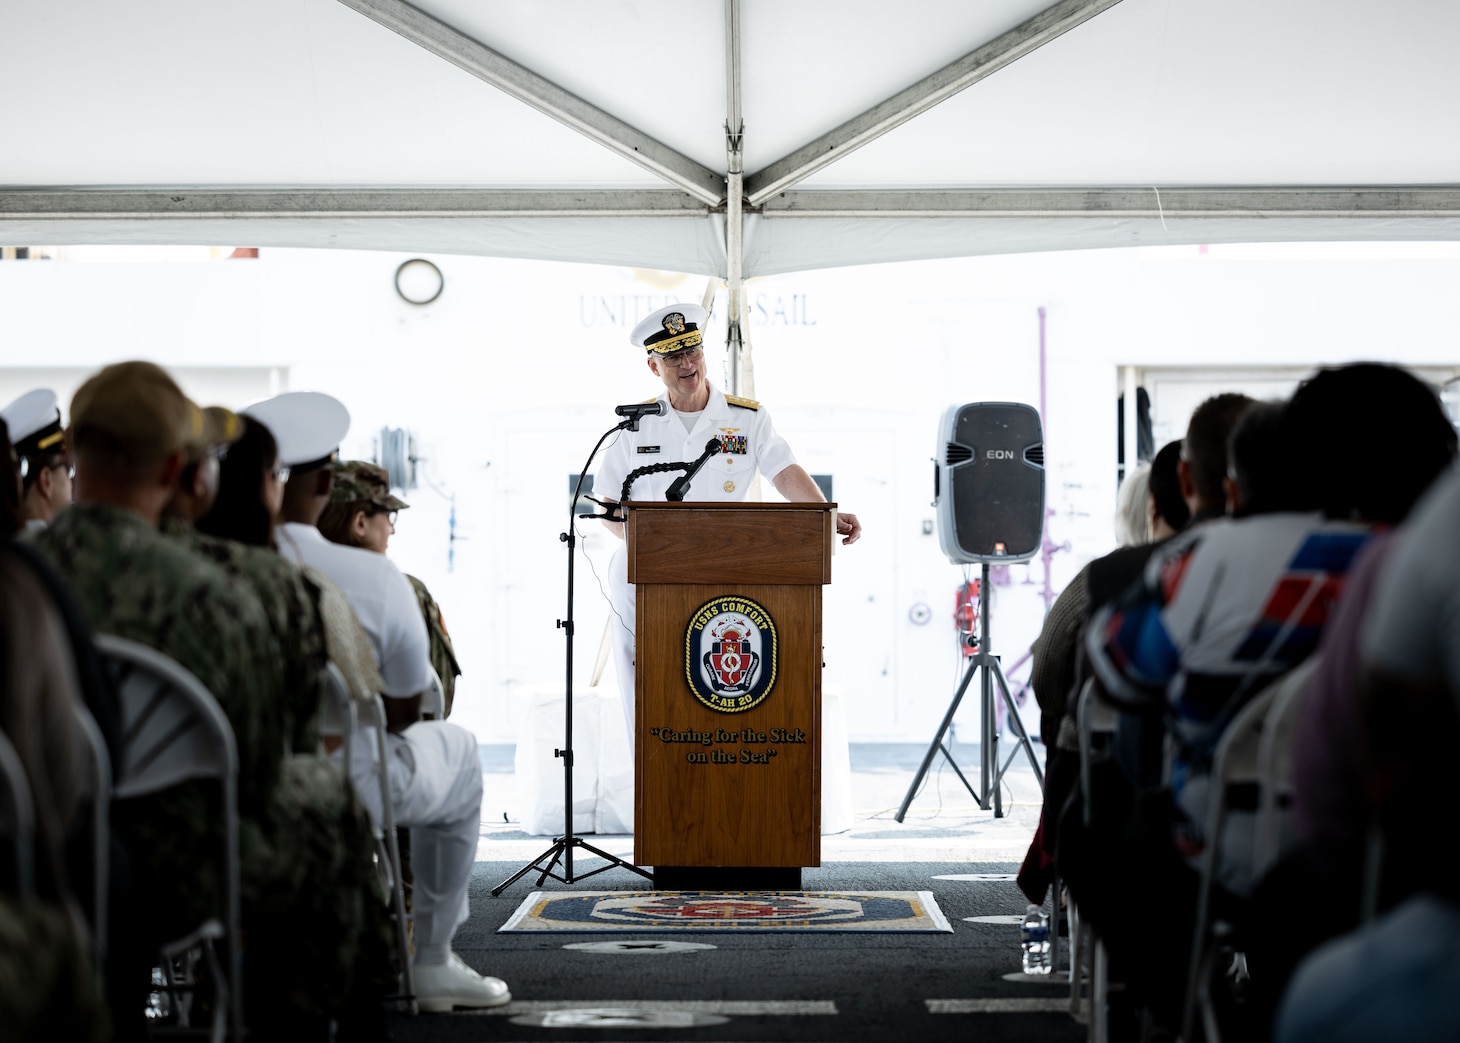 Rear Adm. Michael Wettlaufer, USN Commander, Military Sealift Command (MSC), delivers welcoming remarks during MSC’s National Maritime Day ceremony aboard USNS Comfort (T-AH 20) May 22, 2023. National Maritime Day honors the thousands of dedicated merchant mariners who served aboard United States vessels around the world.